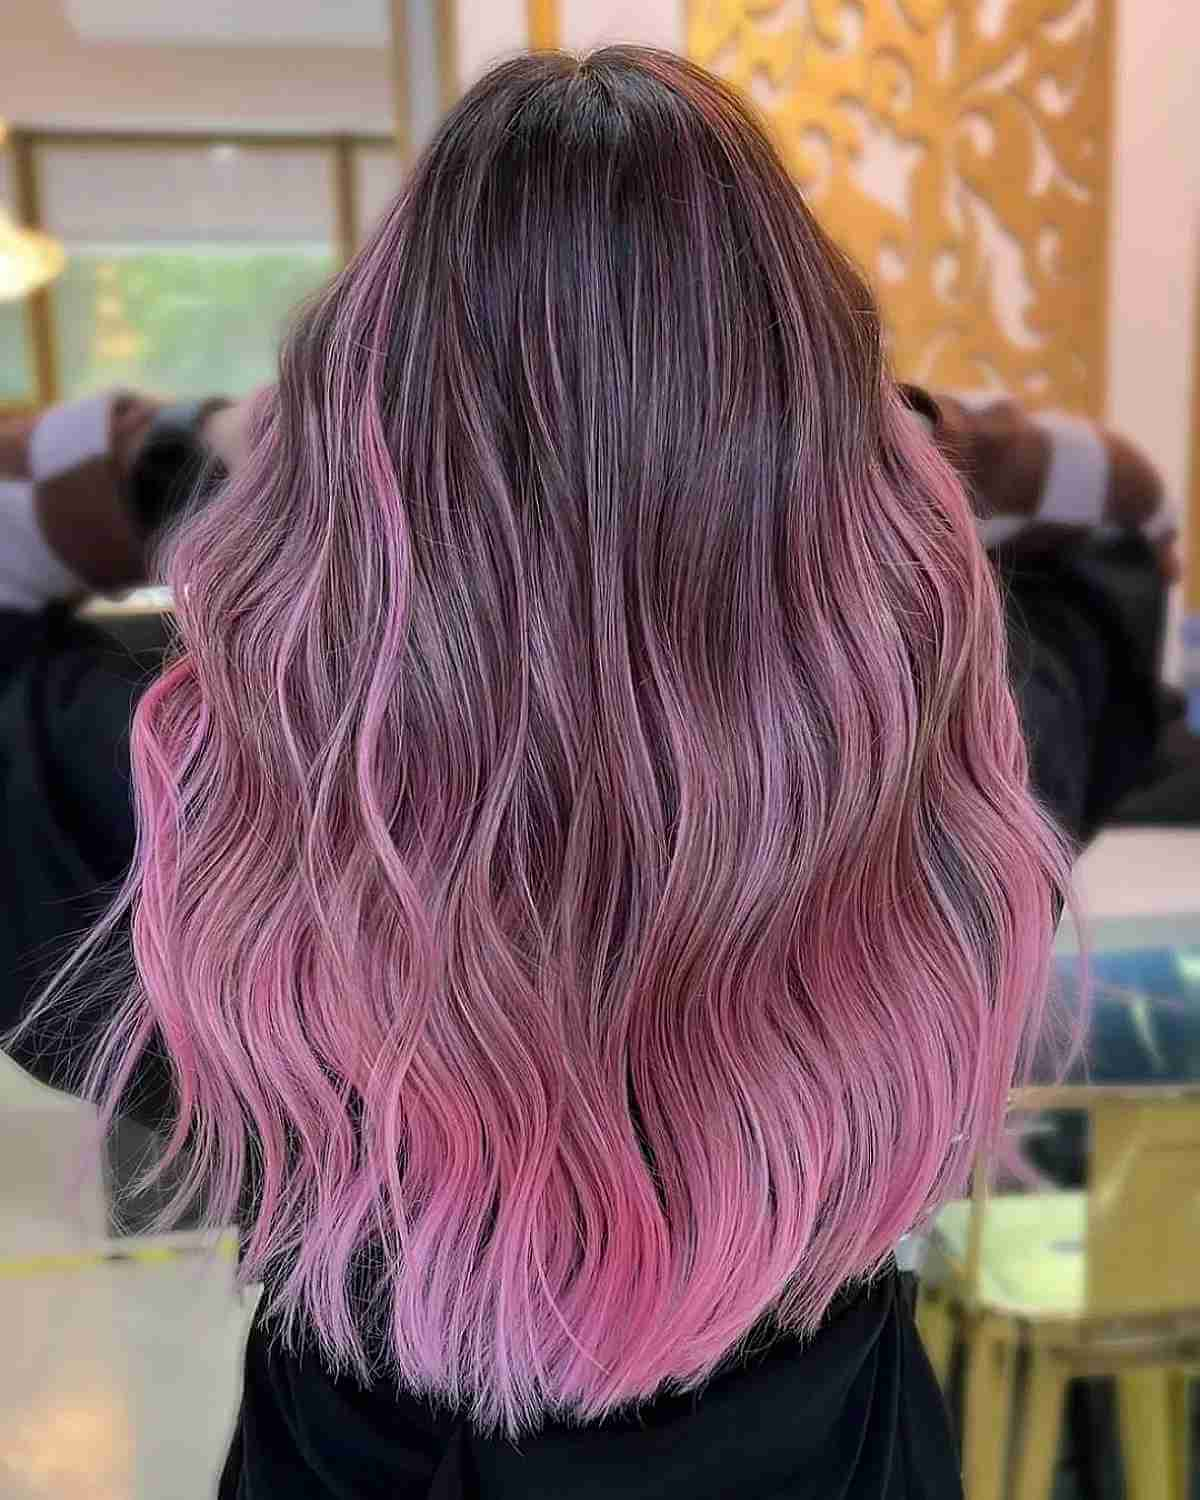 Pink Balayage Ombre Hair with Face-Framing